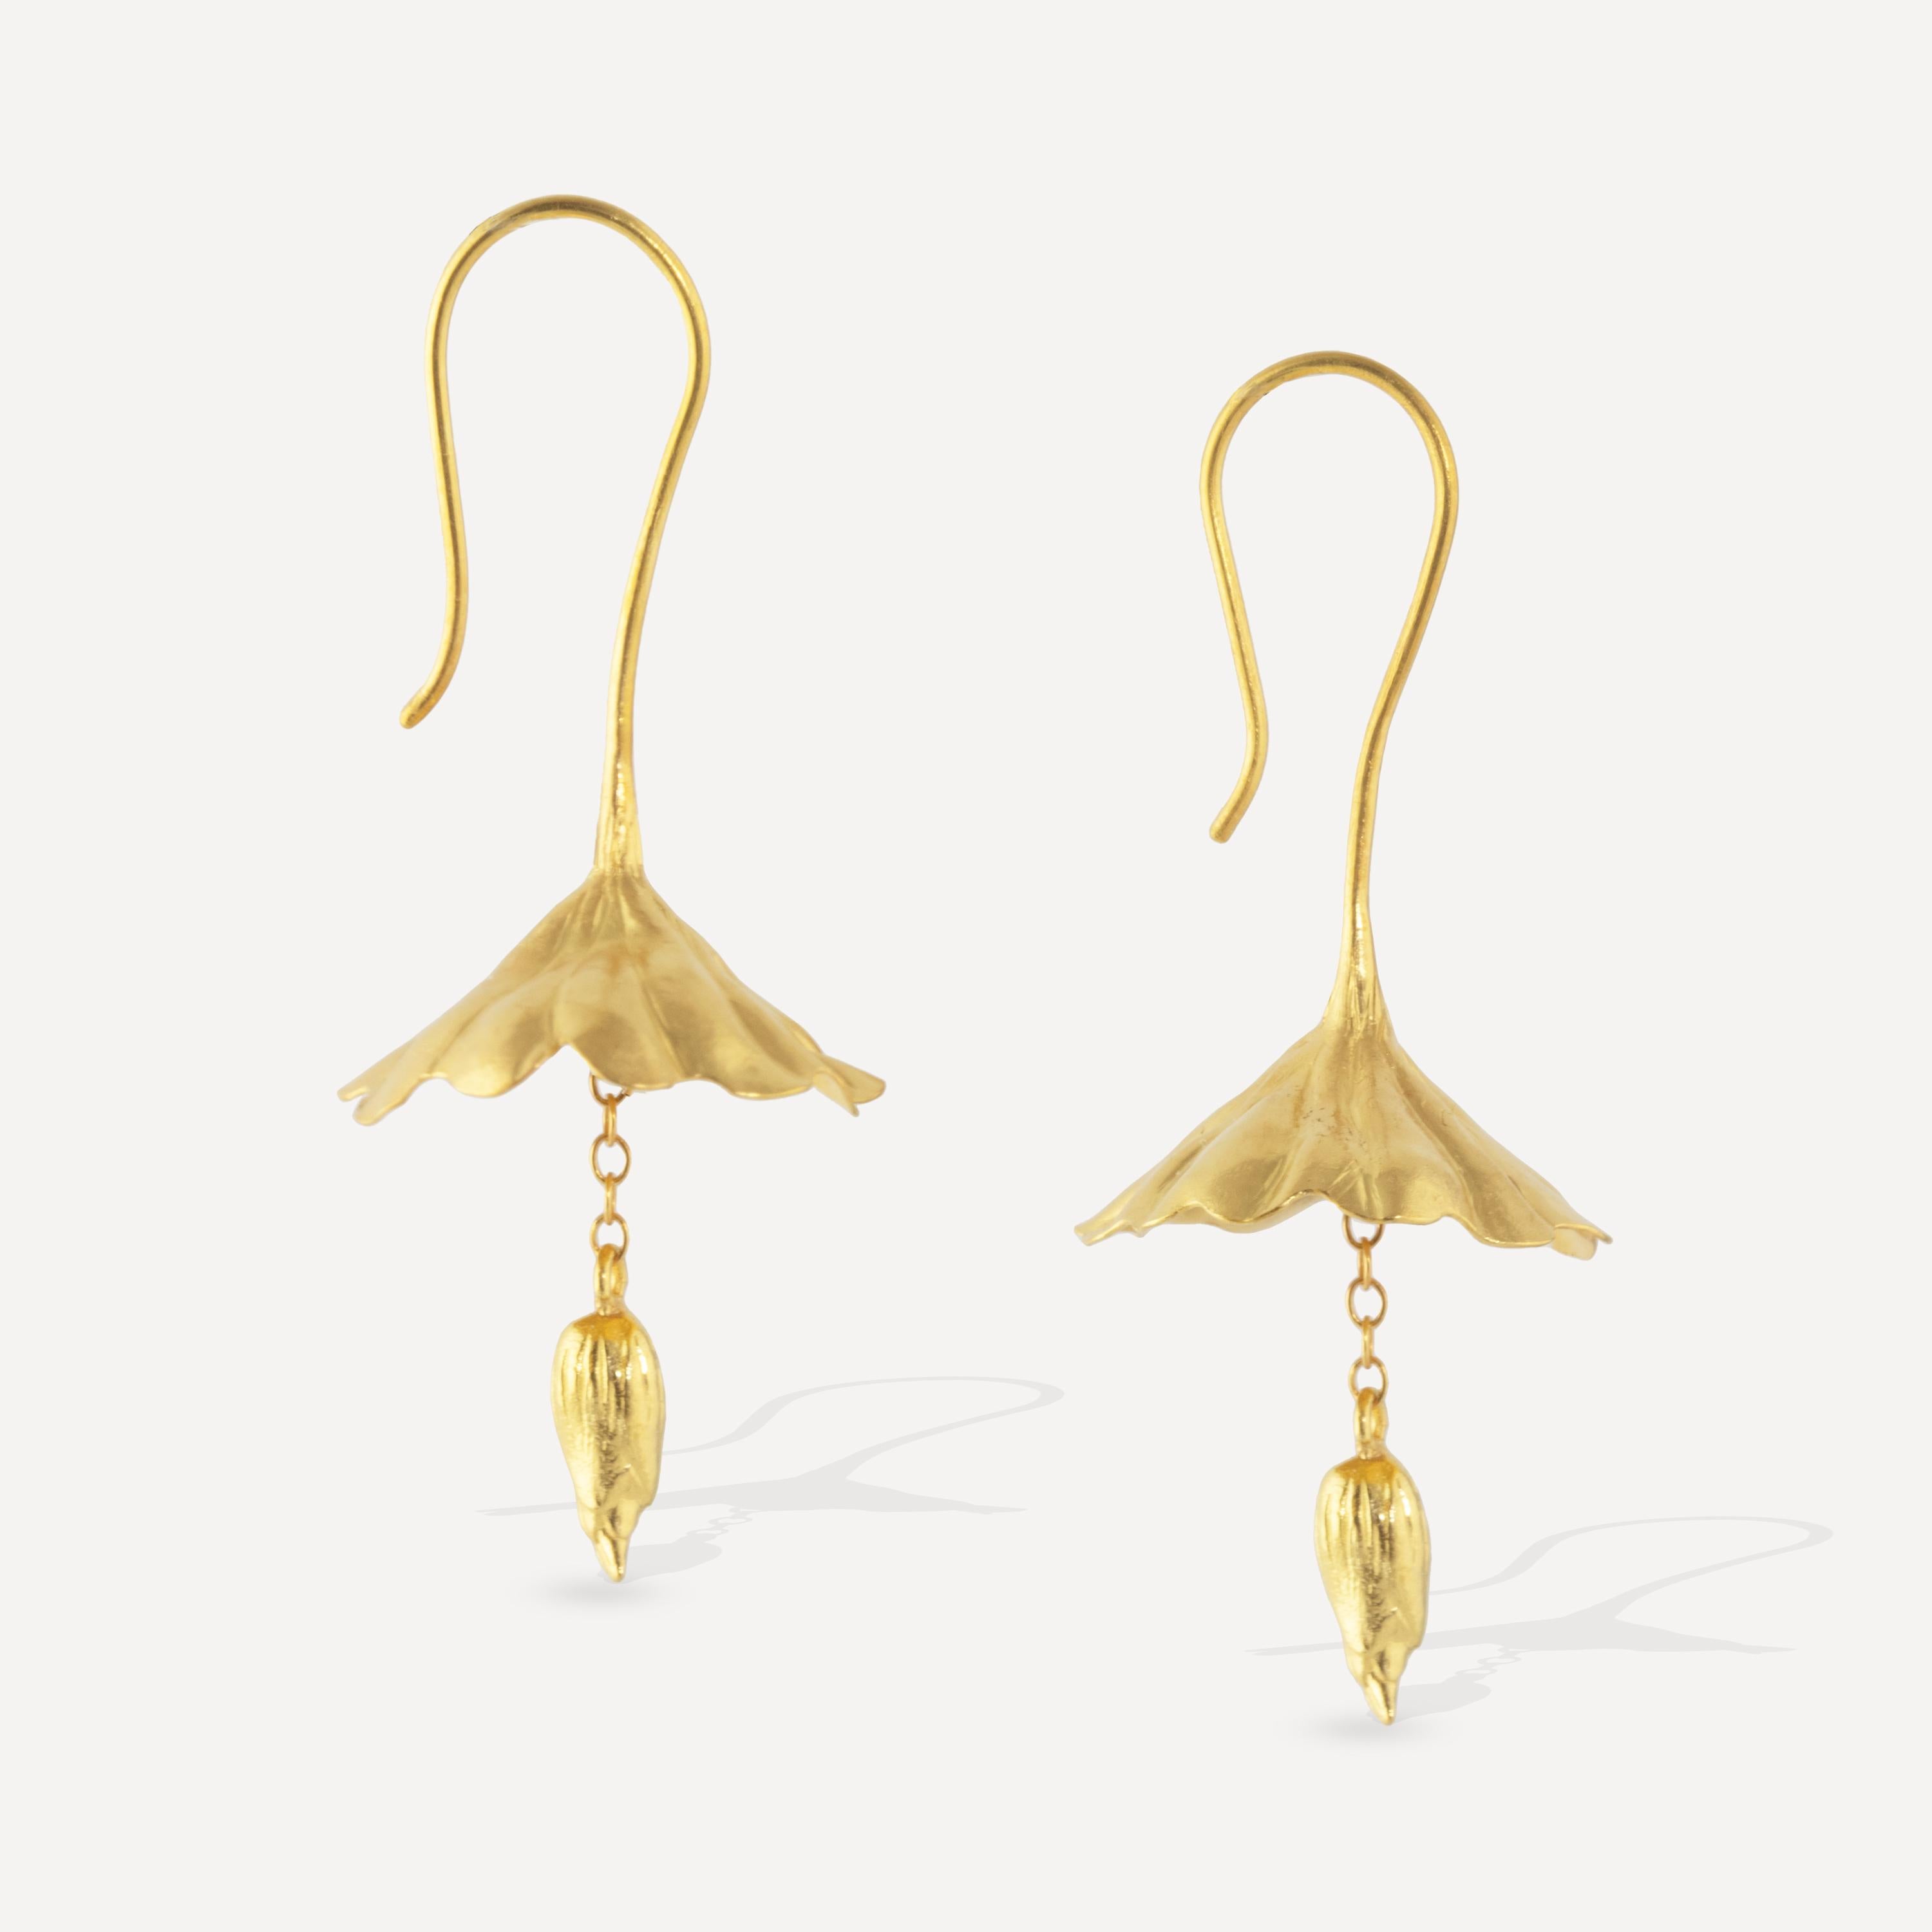 Ico & the Bird Fine Jewelry has collaborated with Turquoise Mountain Myanmar on a new collection celebrating the Lotus flower.
Each piece is handmade in Myanmar by master goldsmiths, trained in ancient techniques 

These statement earrings feature